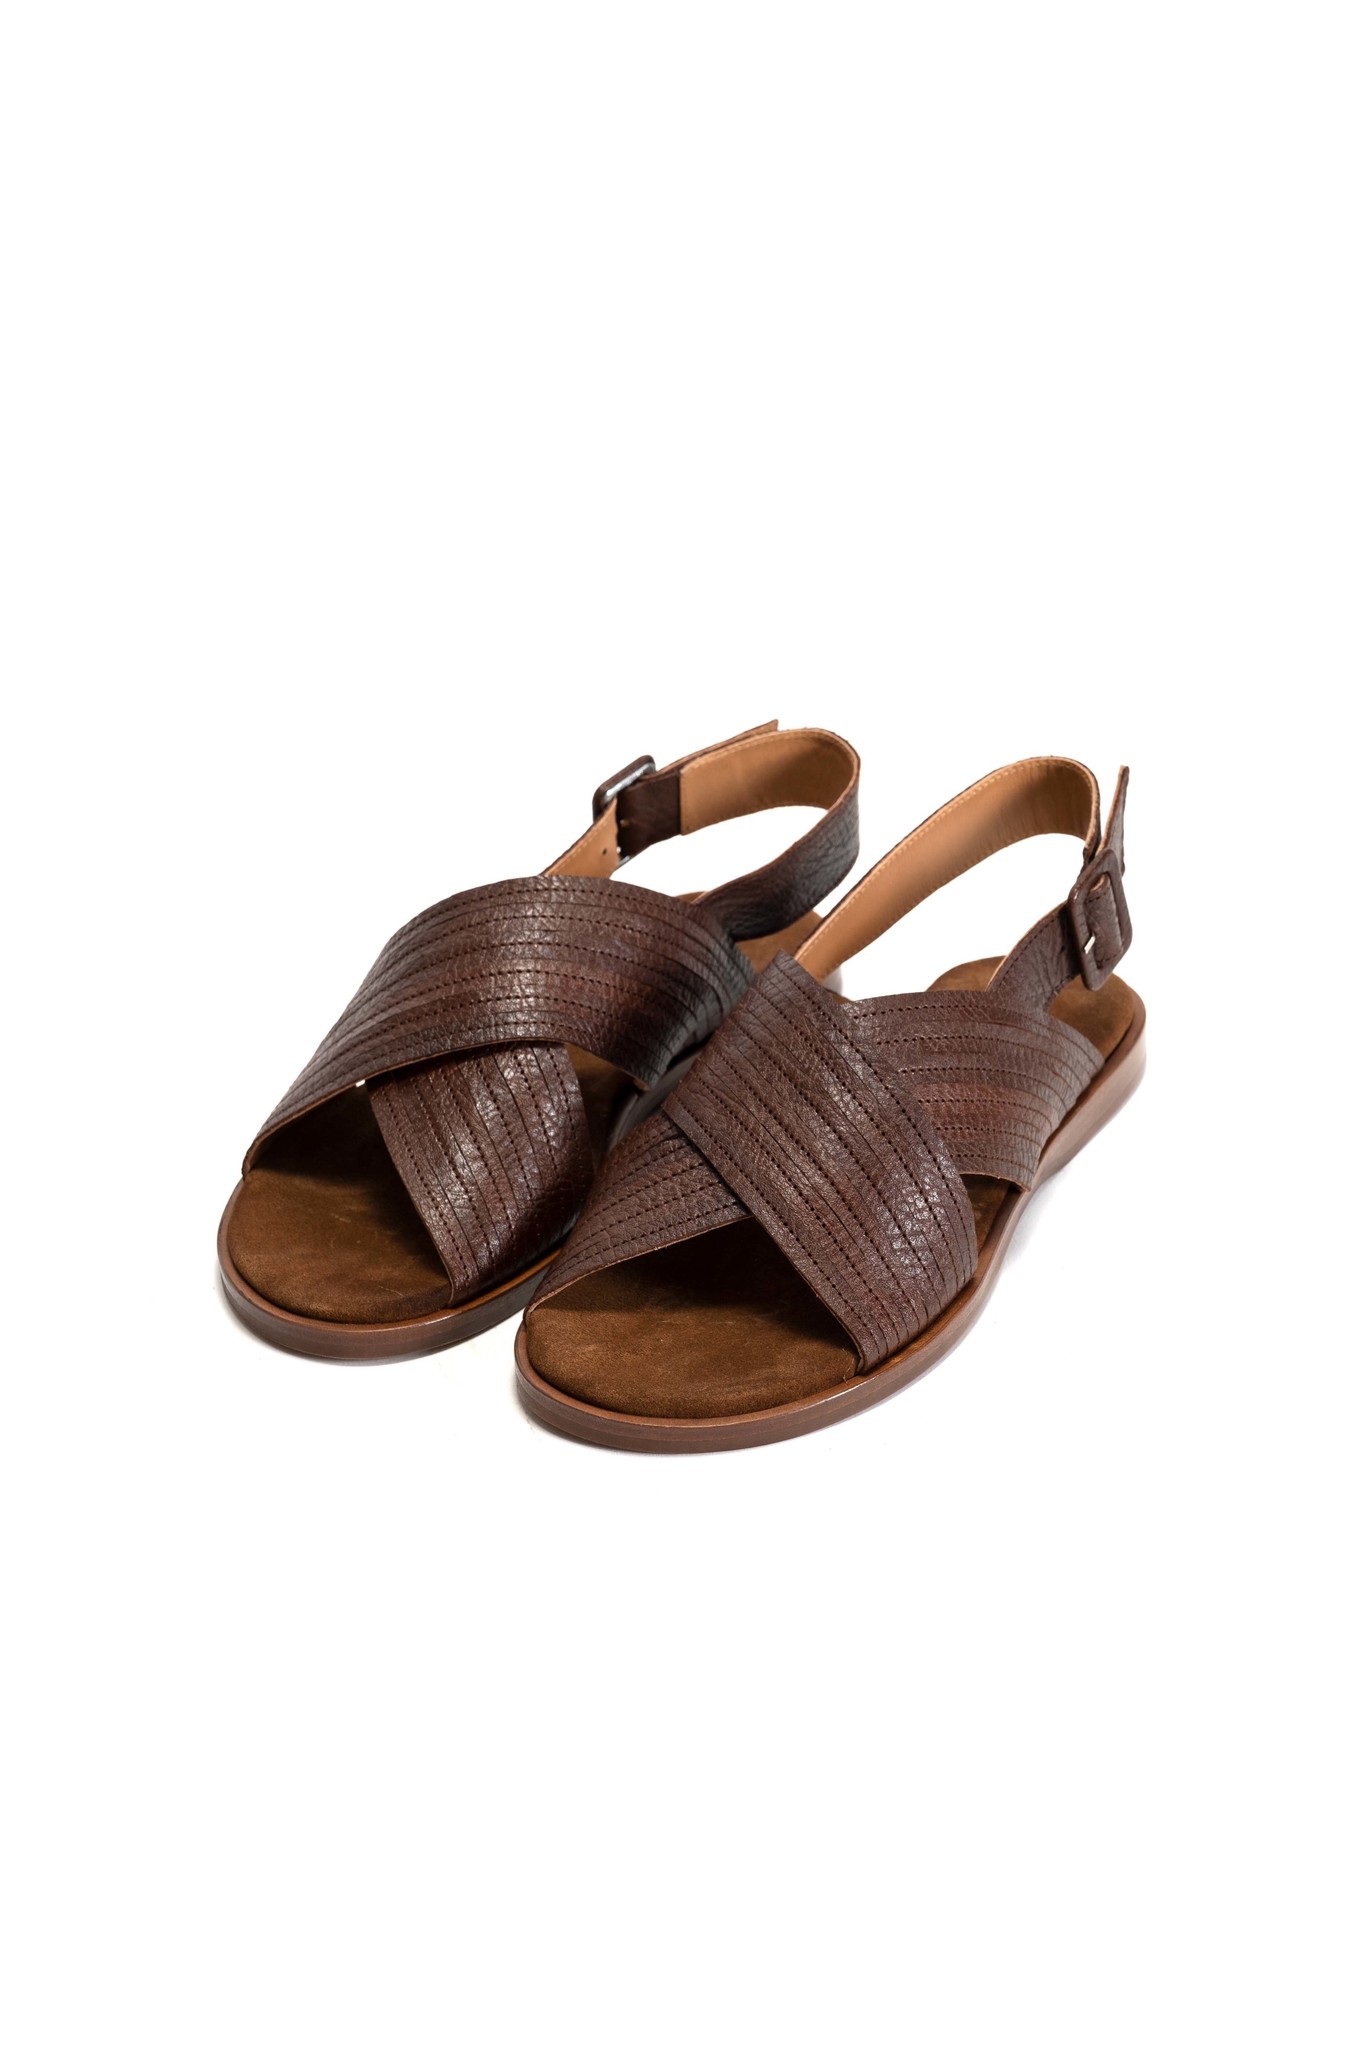 Bria Grained Leather Sandal - Chestnut-2